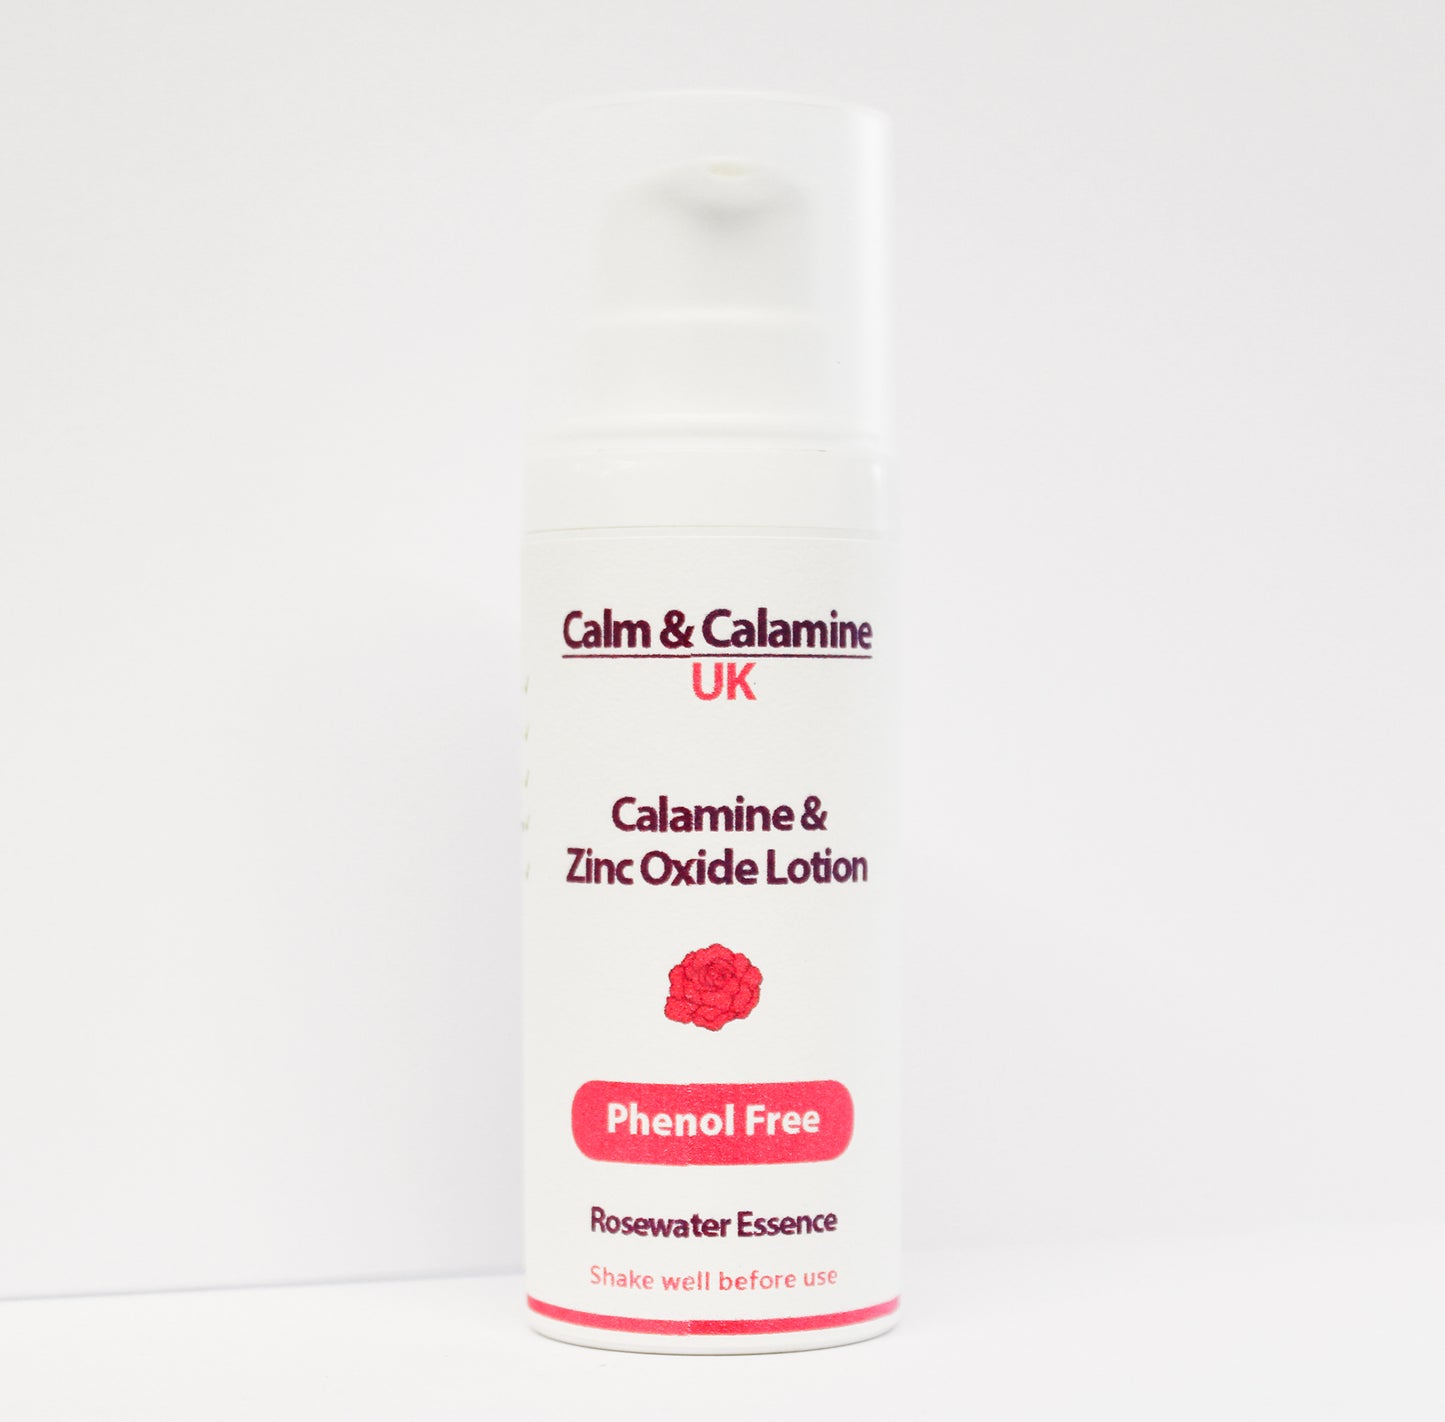 Calamine and Zinc Oxide Lotion 50ml | Phenol Free Calamine lotion for irritated itchy skin